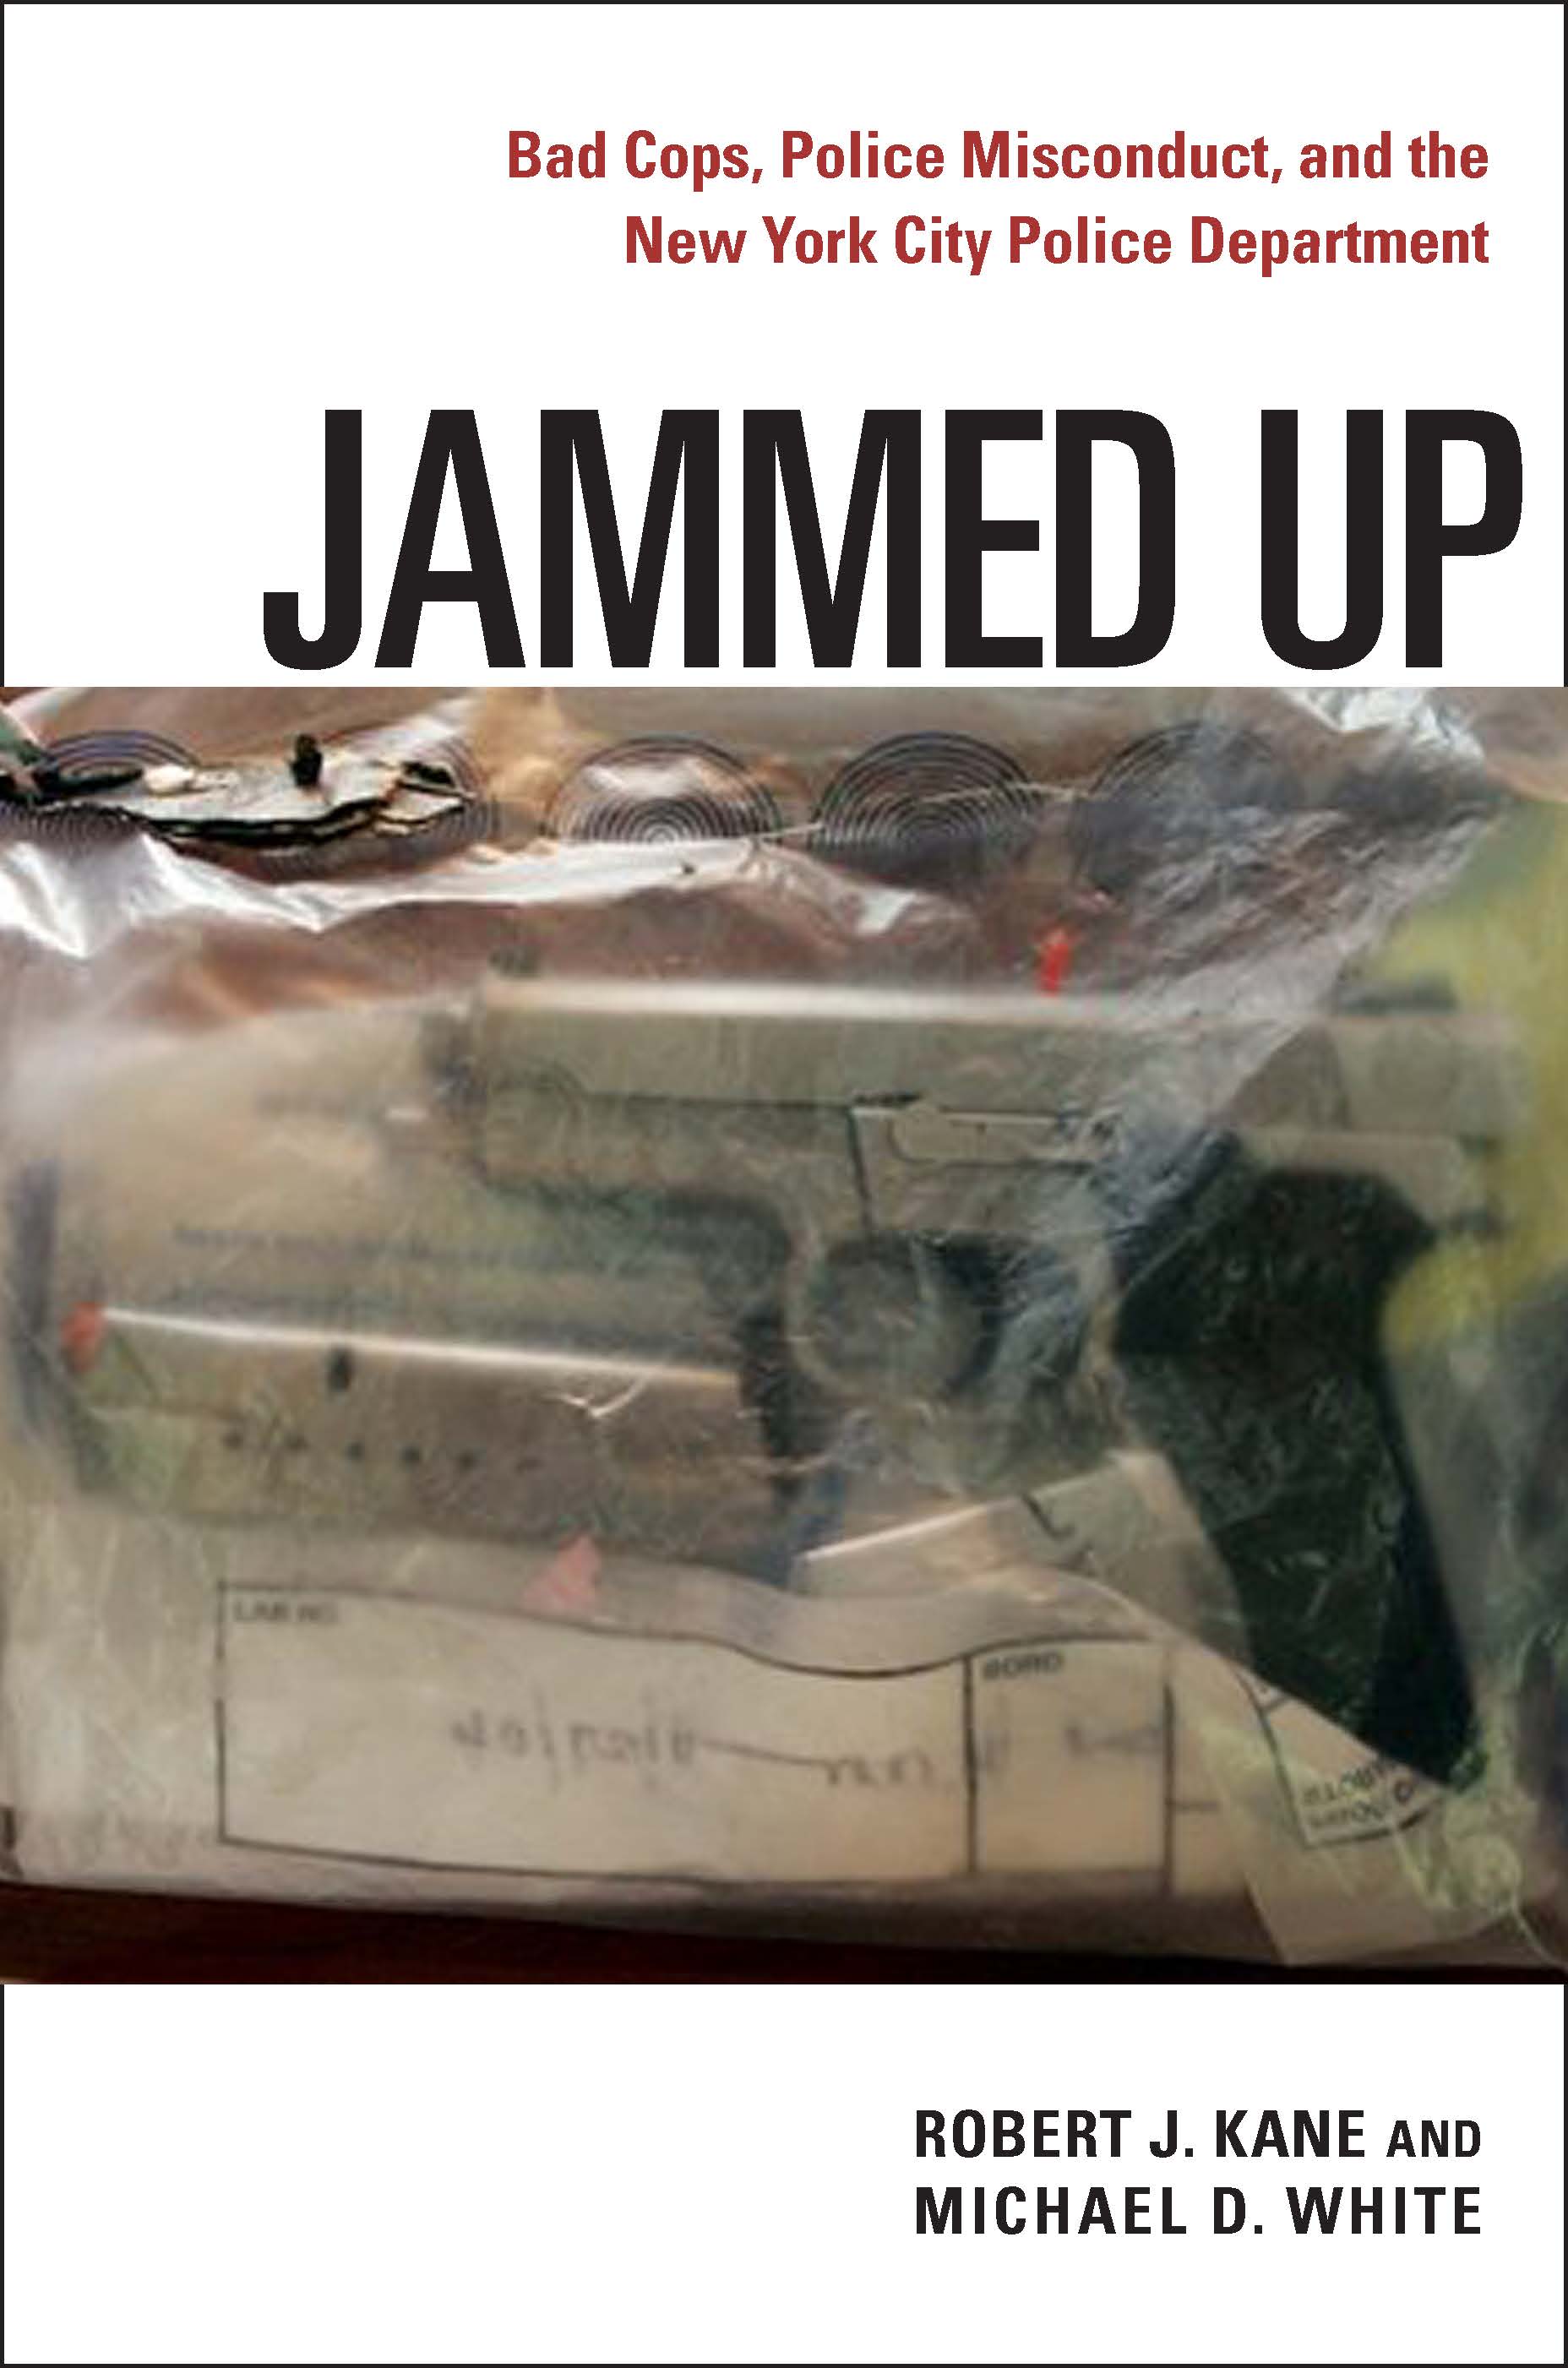 Book cover - Jammed up: Bad cops, police misconduct, and the New York City Police Department